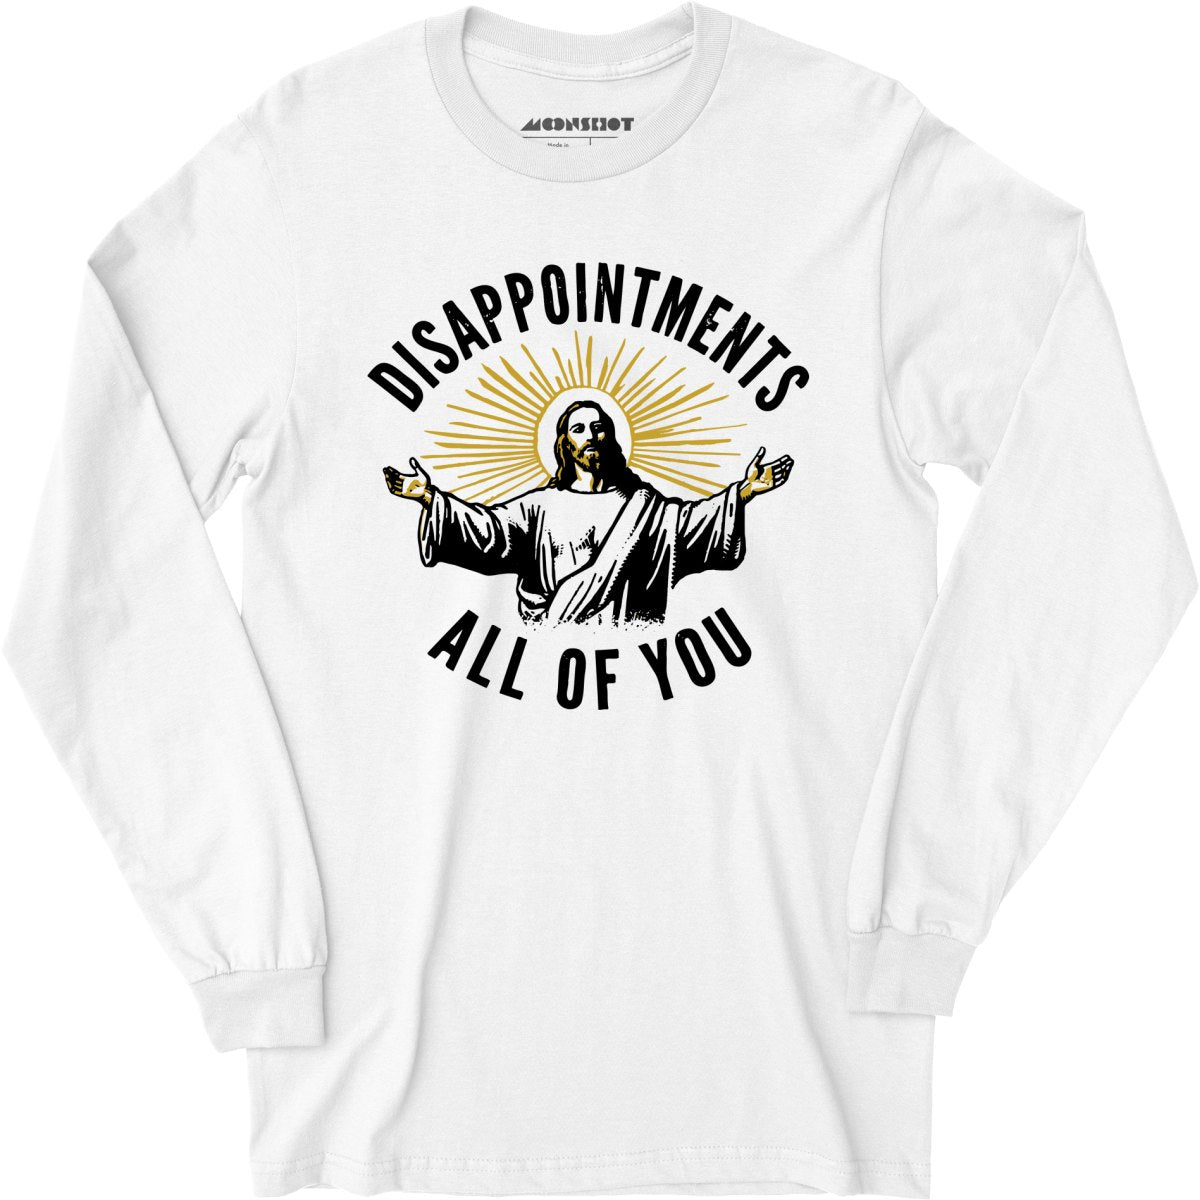 Disappointments All of You - Long Sleeve T-Shirt